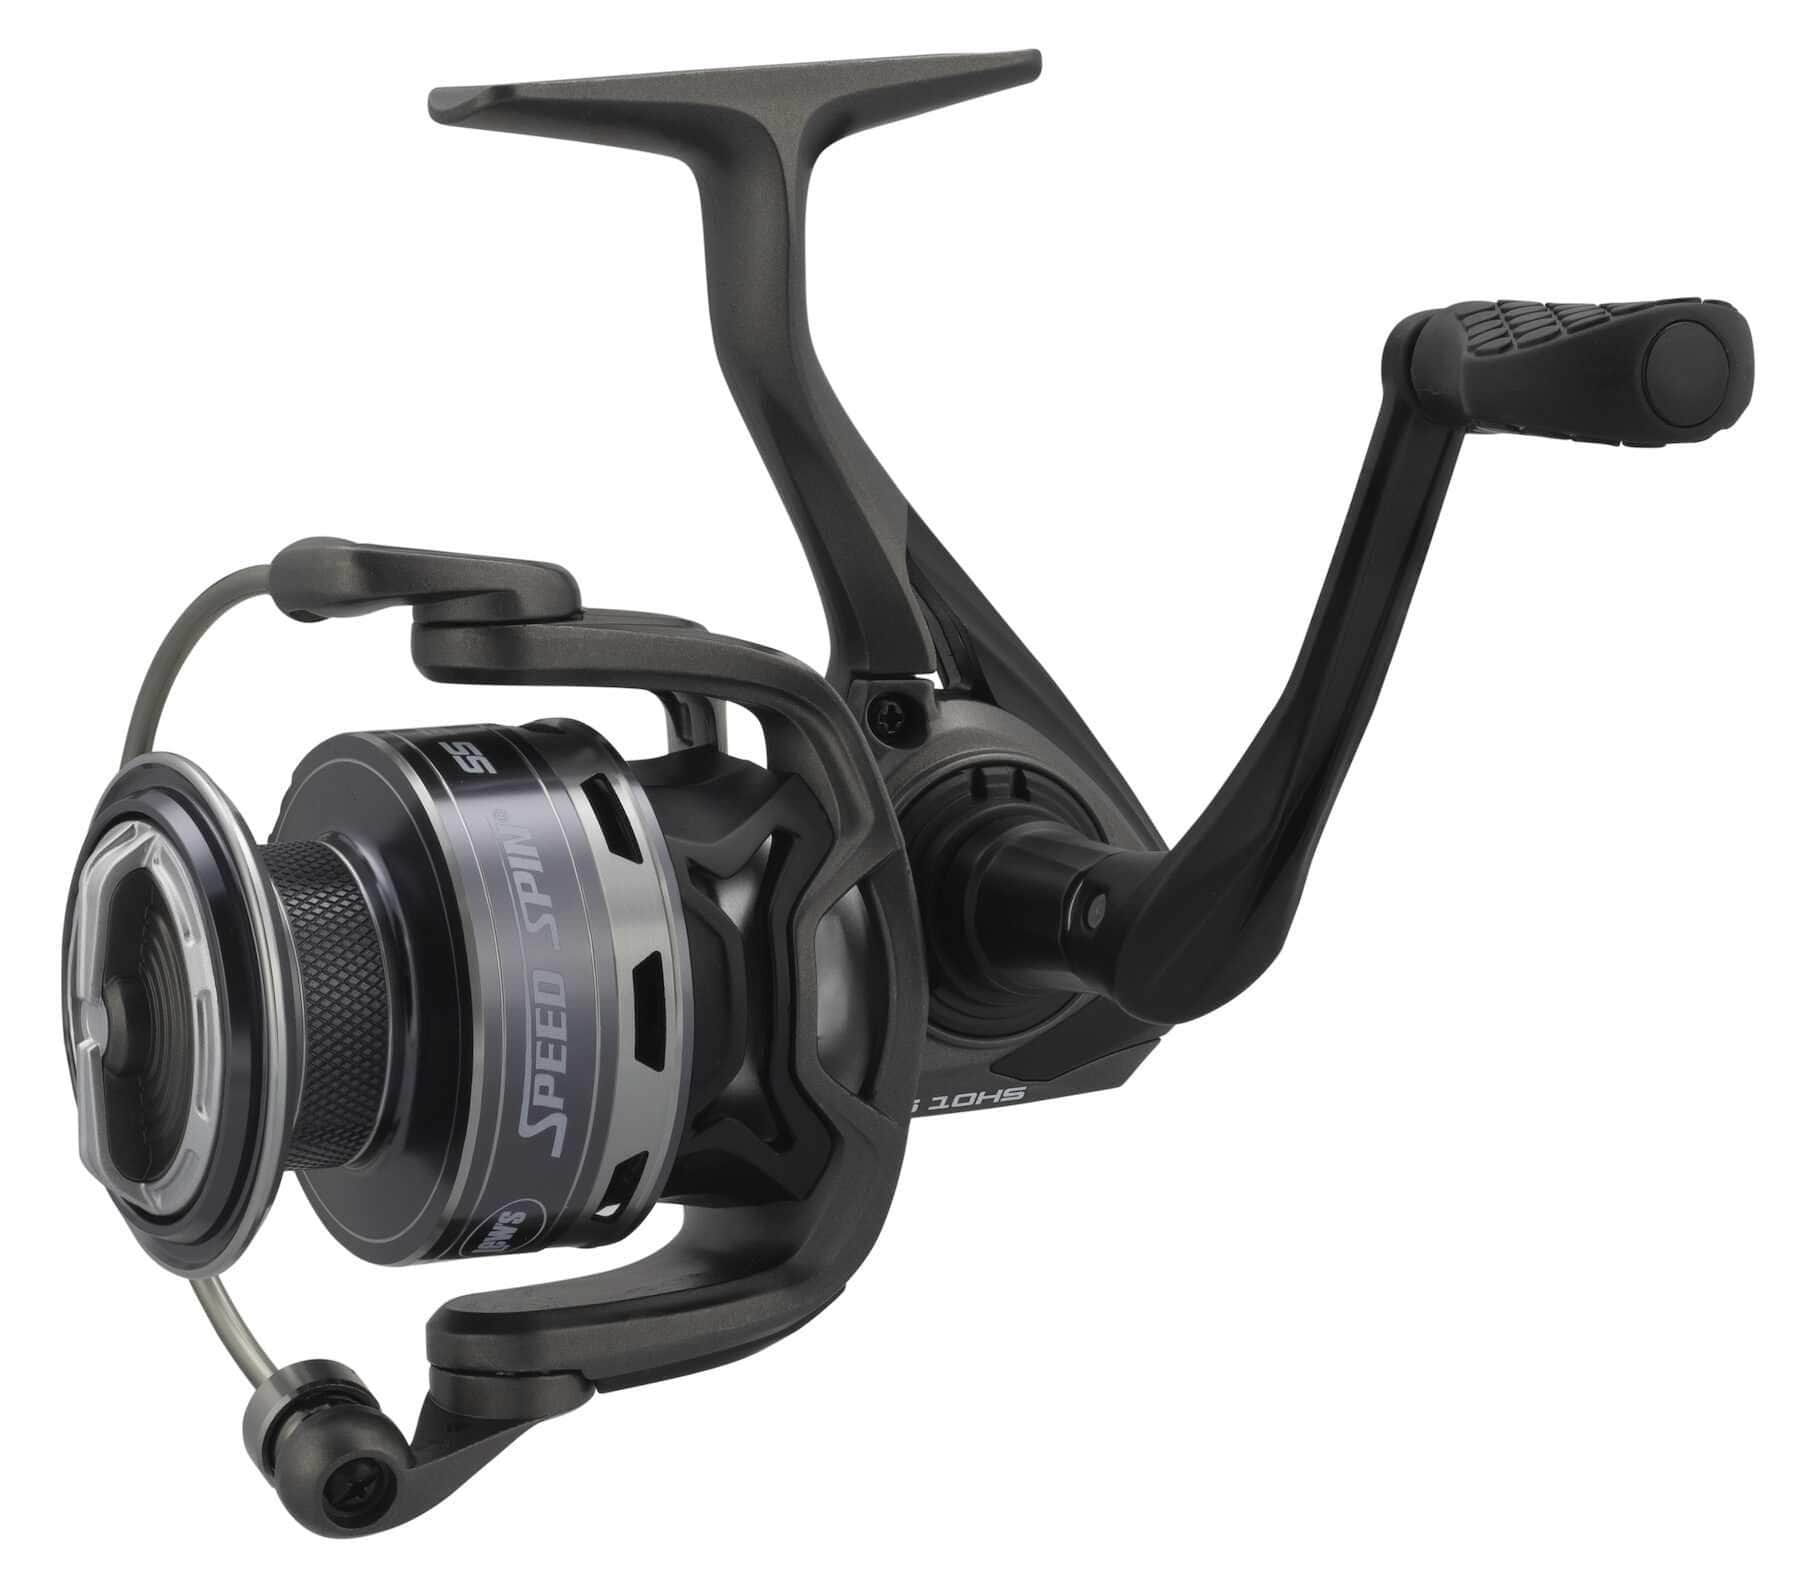 Fishing Reels Lew's Speed Spin Spinning Reel 10 Lew's Fishing Reels - Spinning Reels | Pescador Fishing Supply